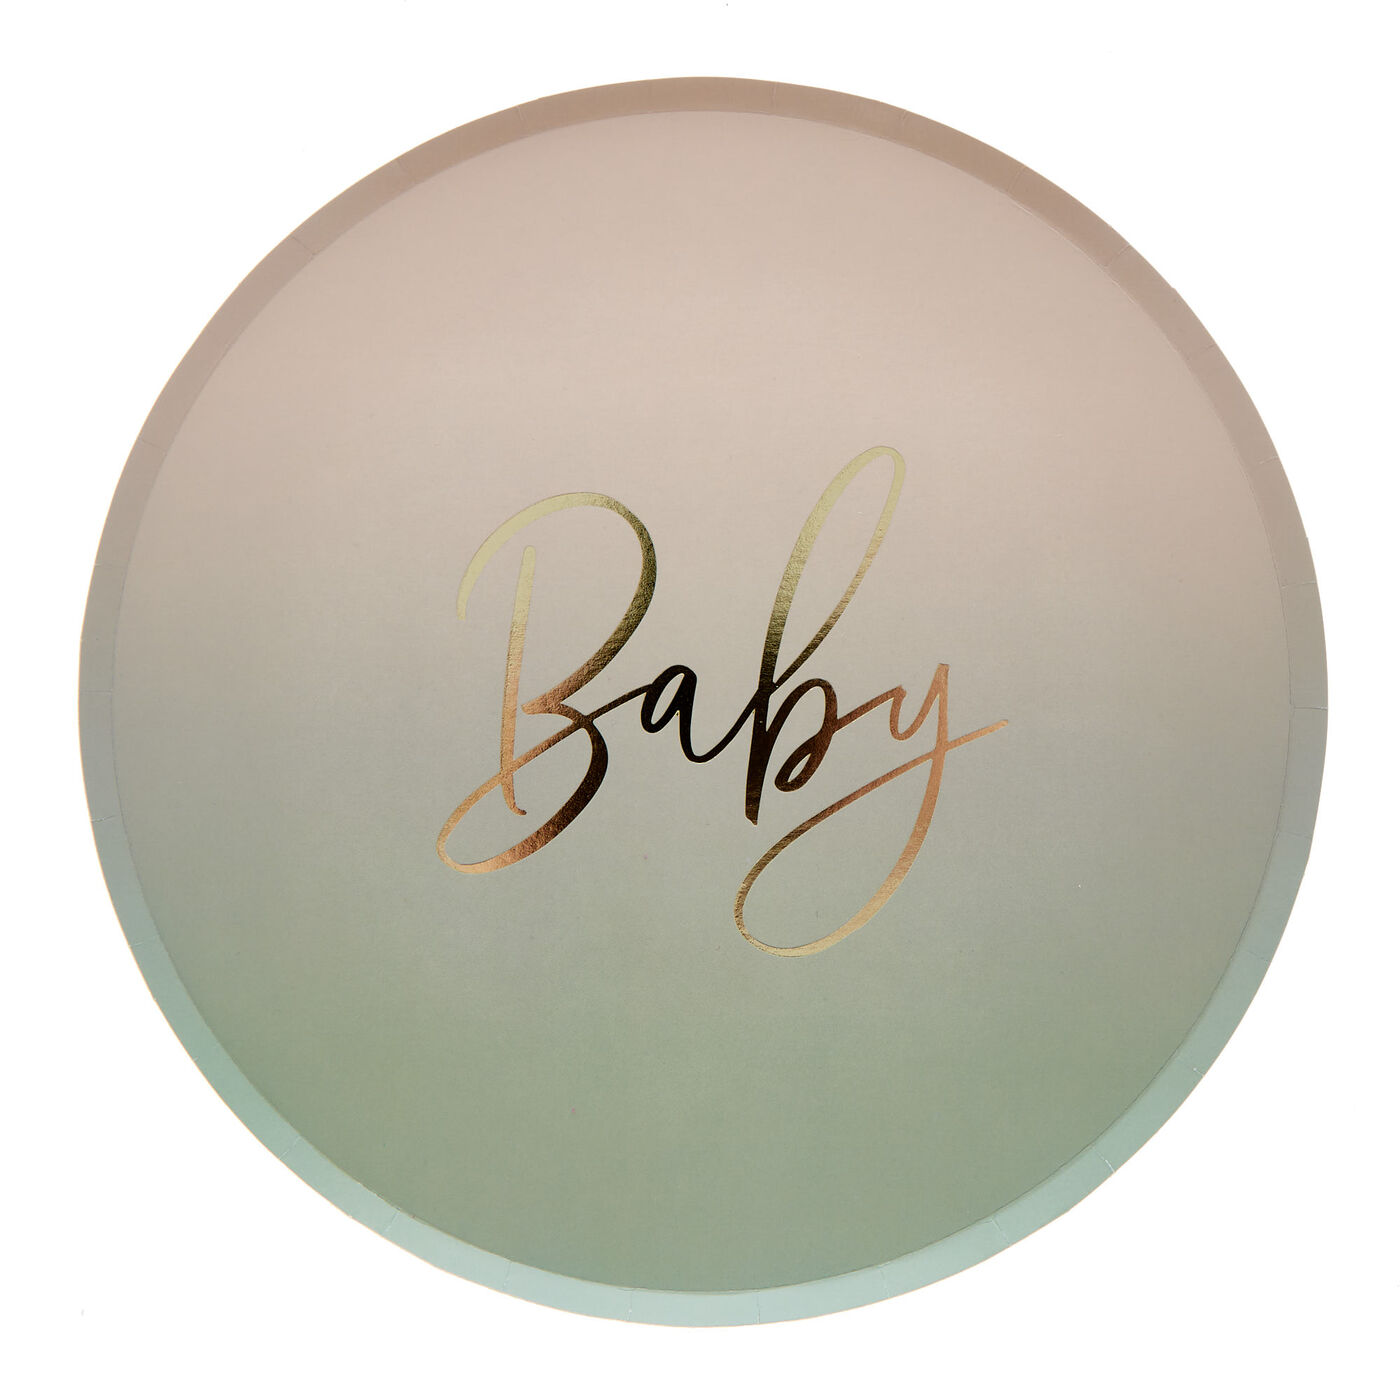 Buy Sage Unisex Baby Shower Party Tableware & Decorations Bundle - 8 Guests  for GBP 19.99